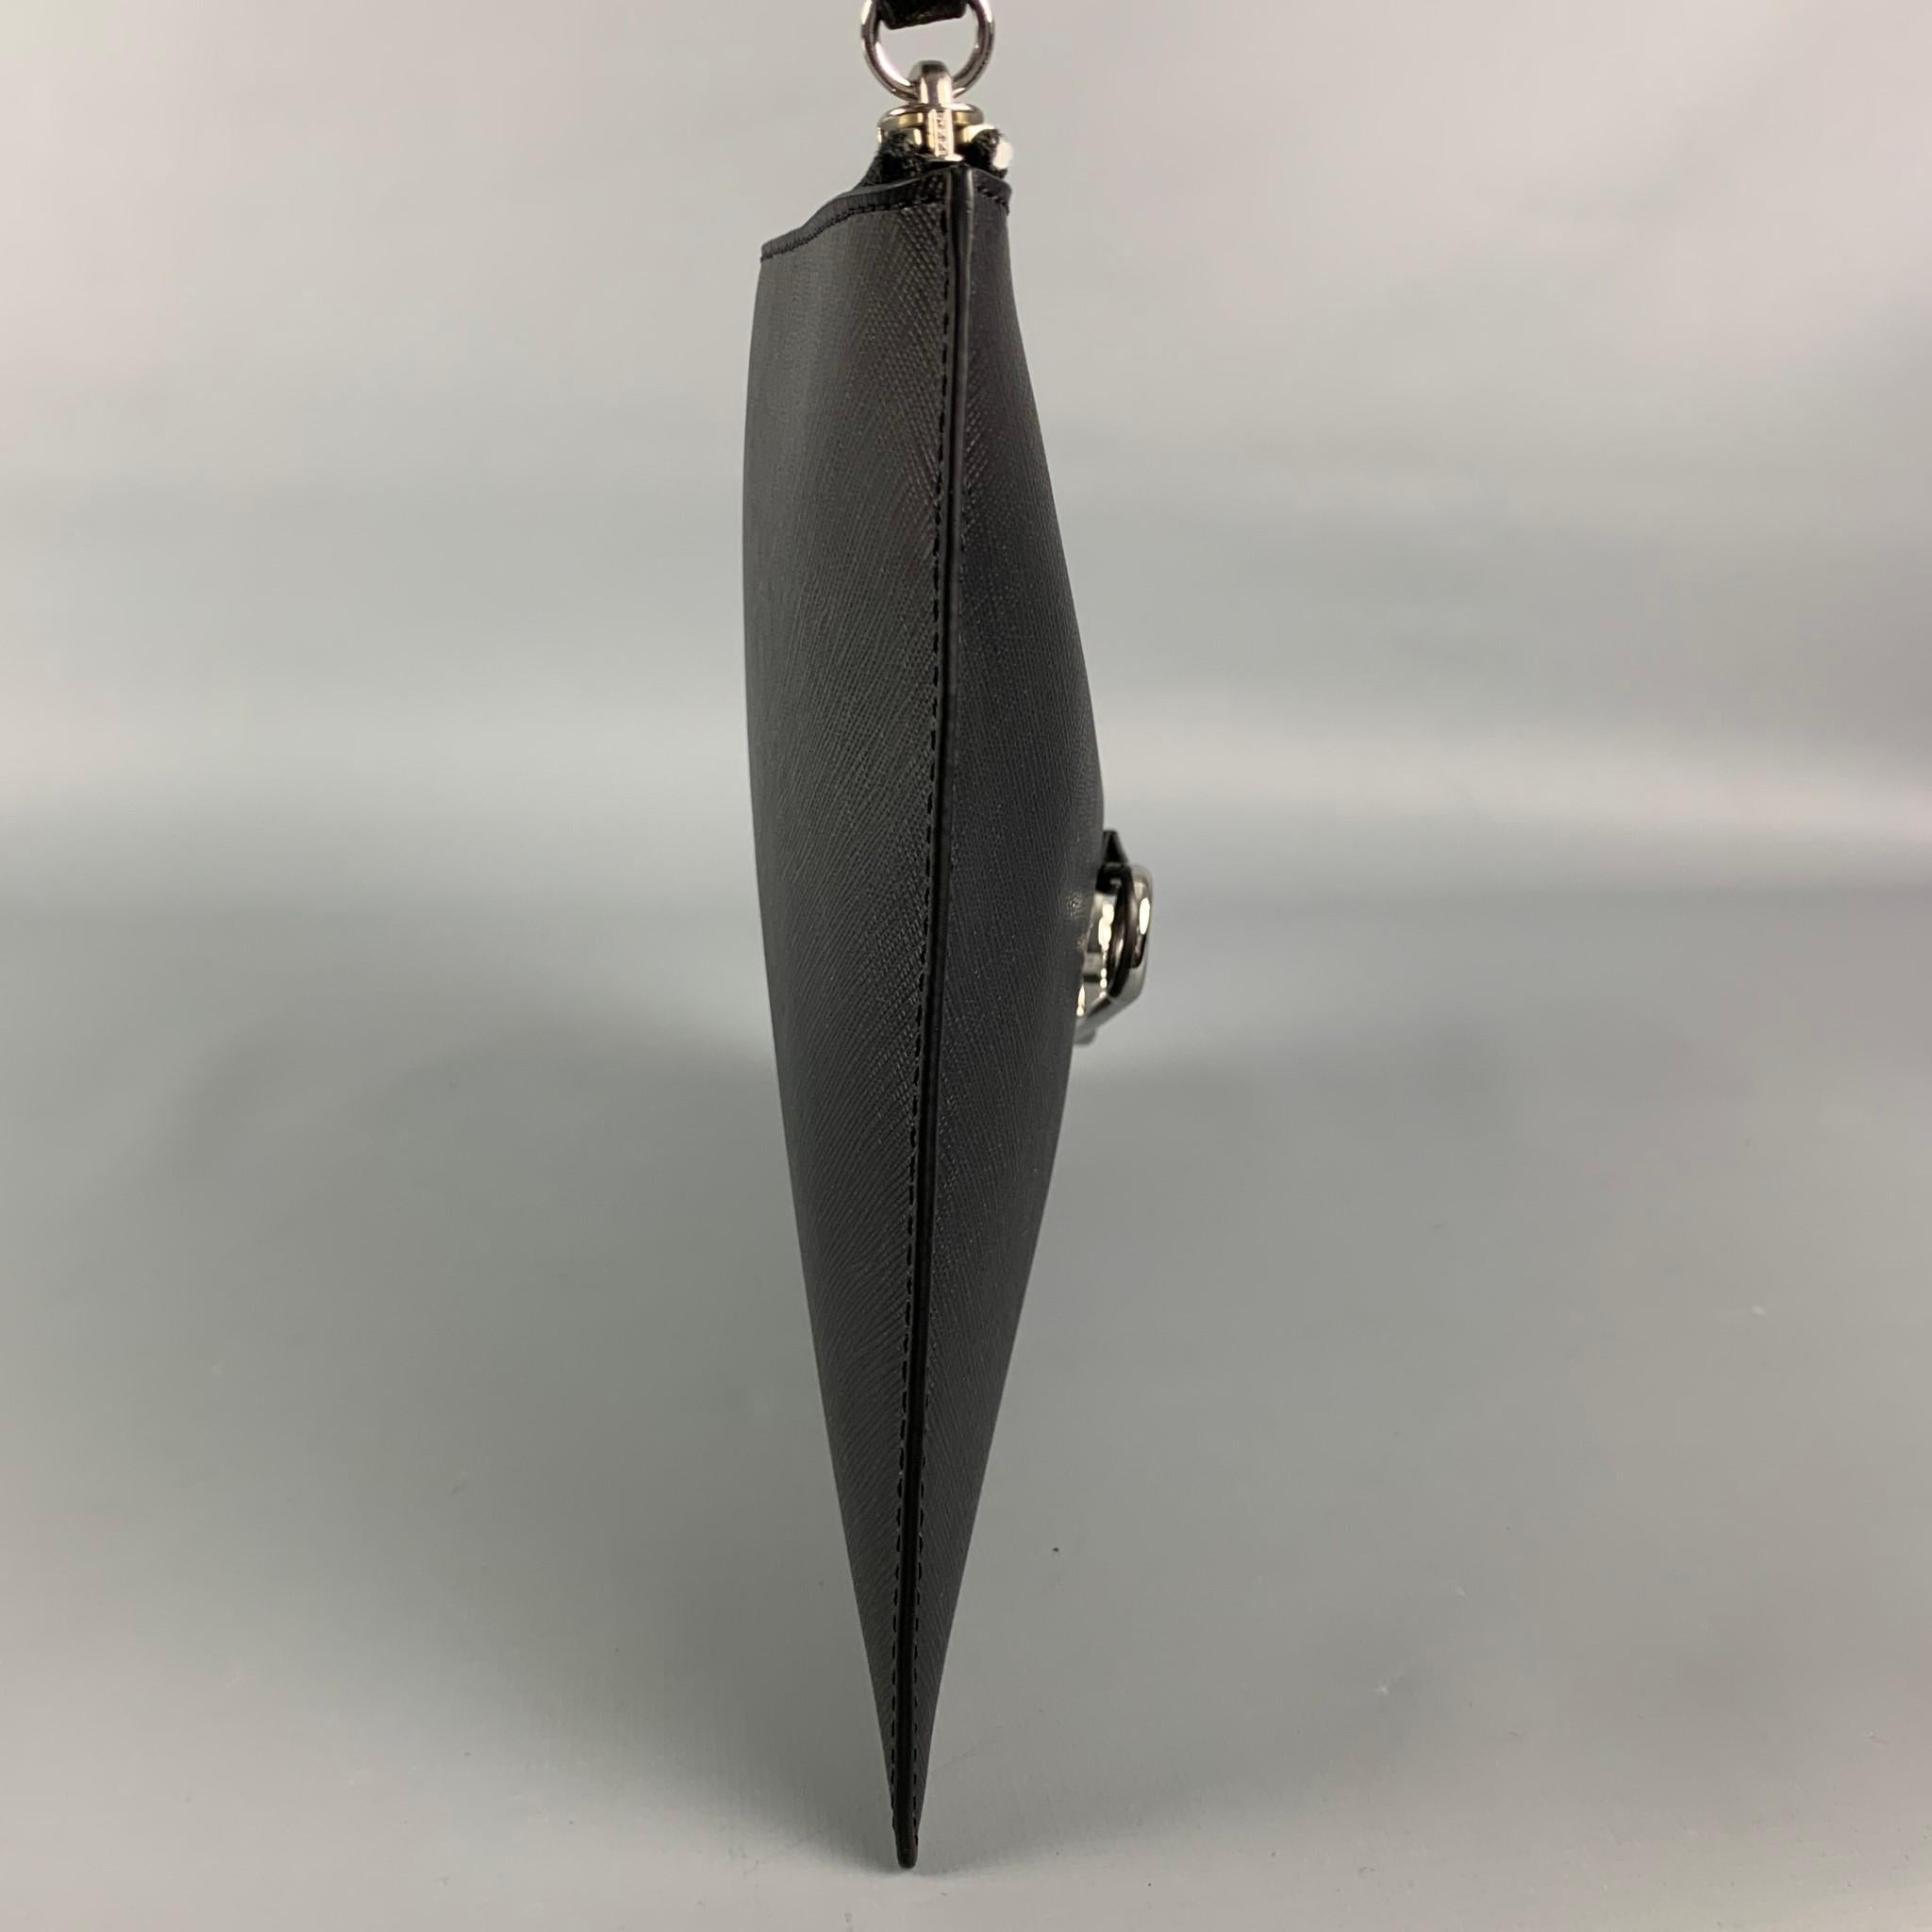 VERSUS by GIANNI VERSACE wristlet comes in a black leather featuring a large safety pin logo design, wrist strap, and a zipper closure. 

Excellent Pre-Owned Condition.

Measurements:

Length: 11 in.
Height: 8 in.
Drop: 6 in. 